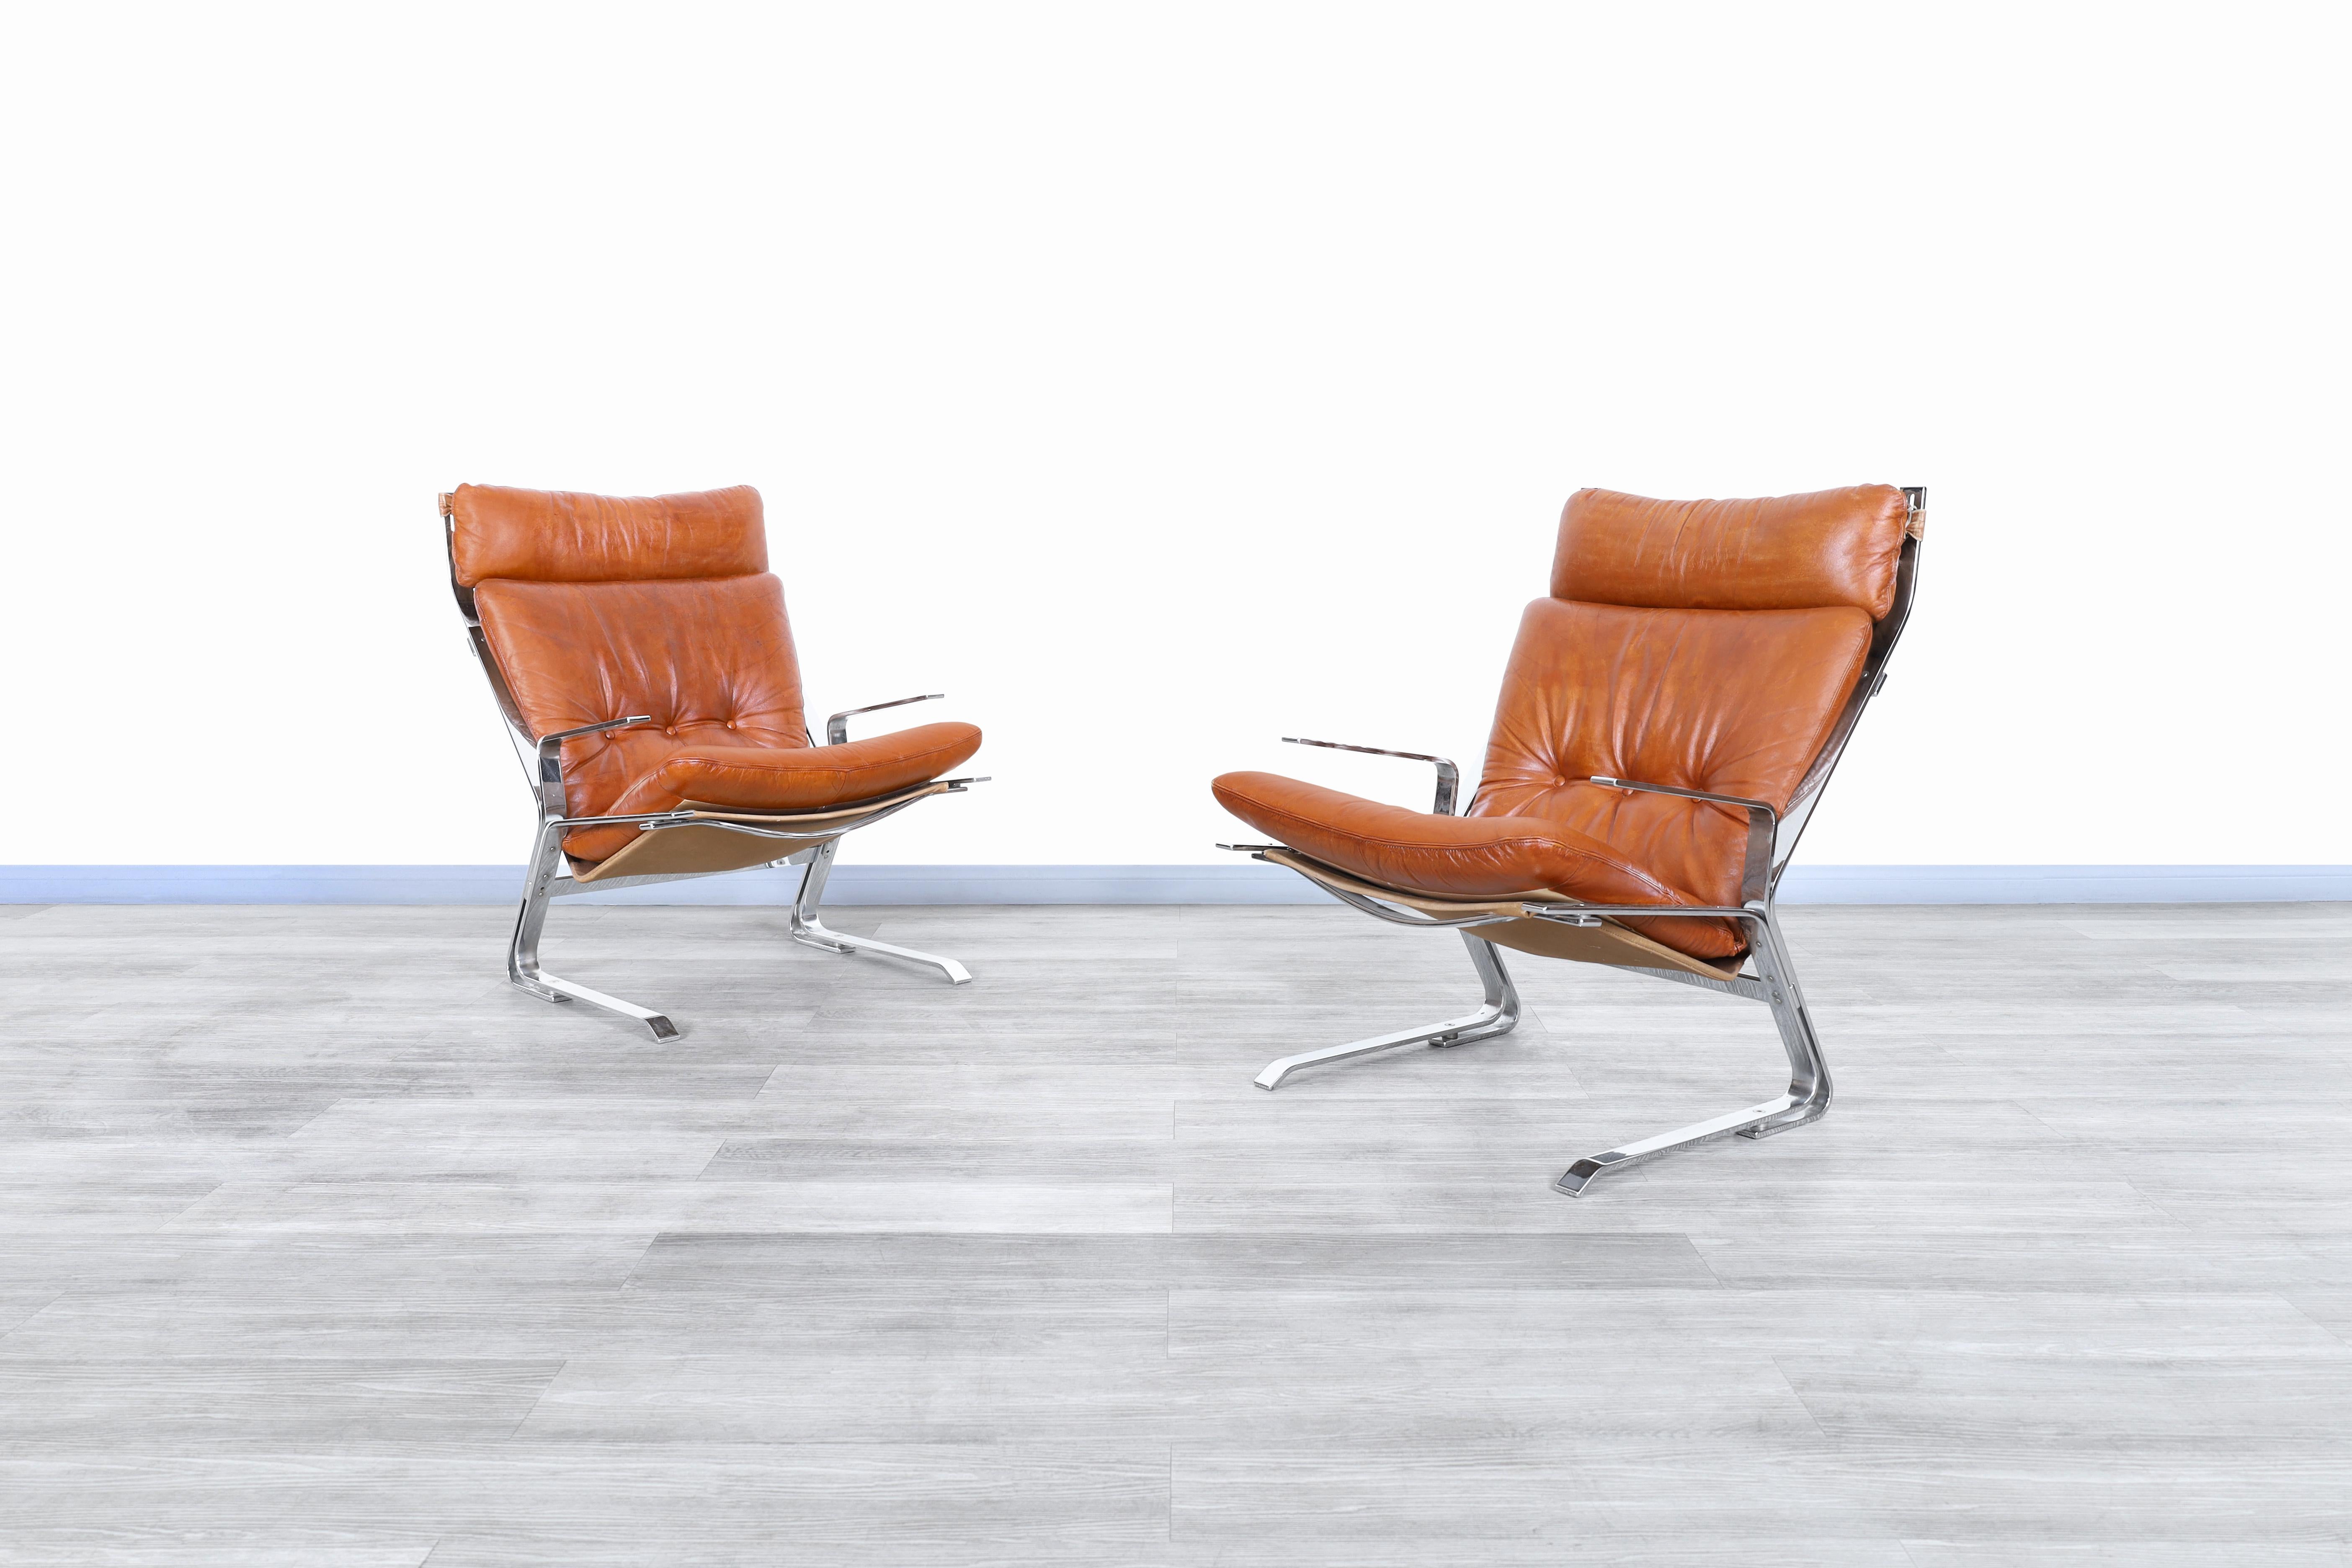 Wonderful vintage leather and chrome “pirate” lounge chairs designed by Elsa and Nordahl Solheim for Rykken and Co. in Norway, circa 1970s. These chairs have a distinctive design and are a great representation of the mid-century era. Each chair has